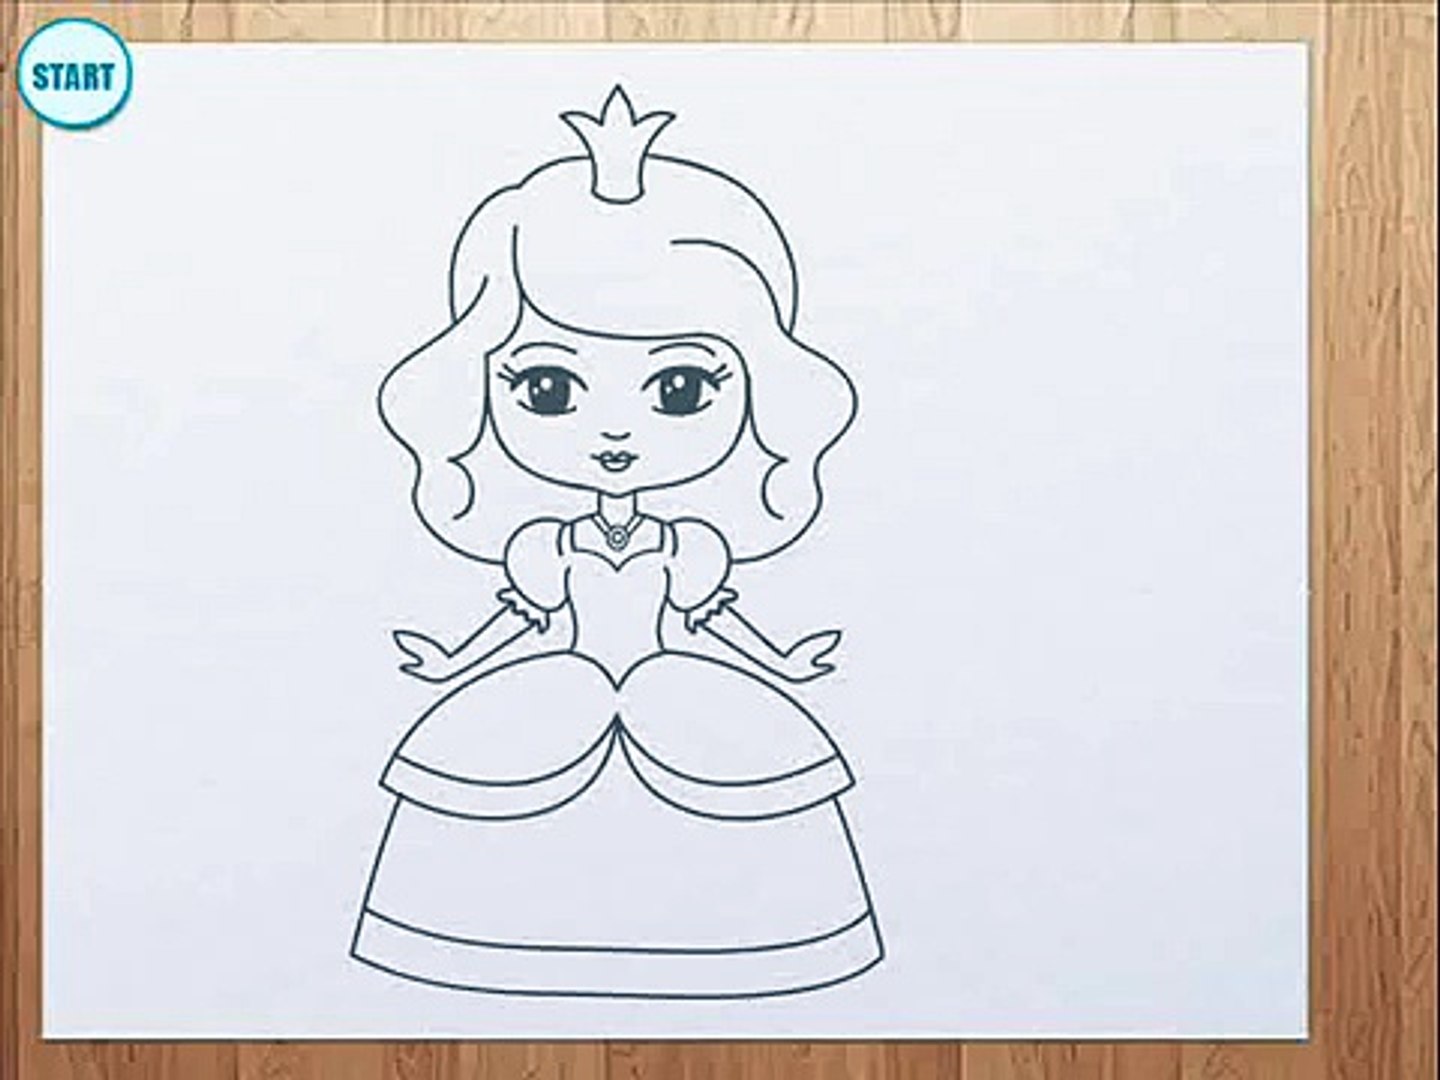 How To Draw A Princess Dailymotion Video